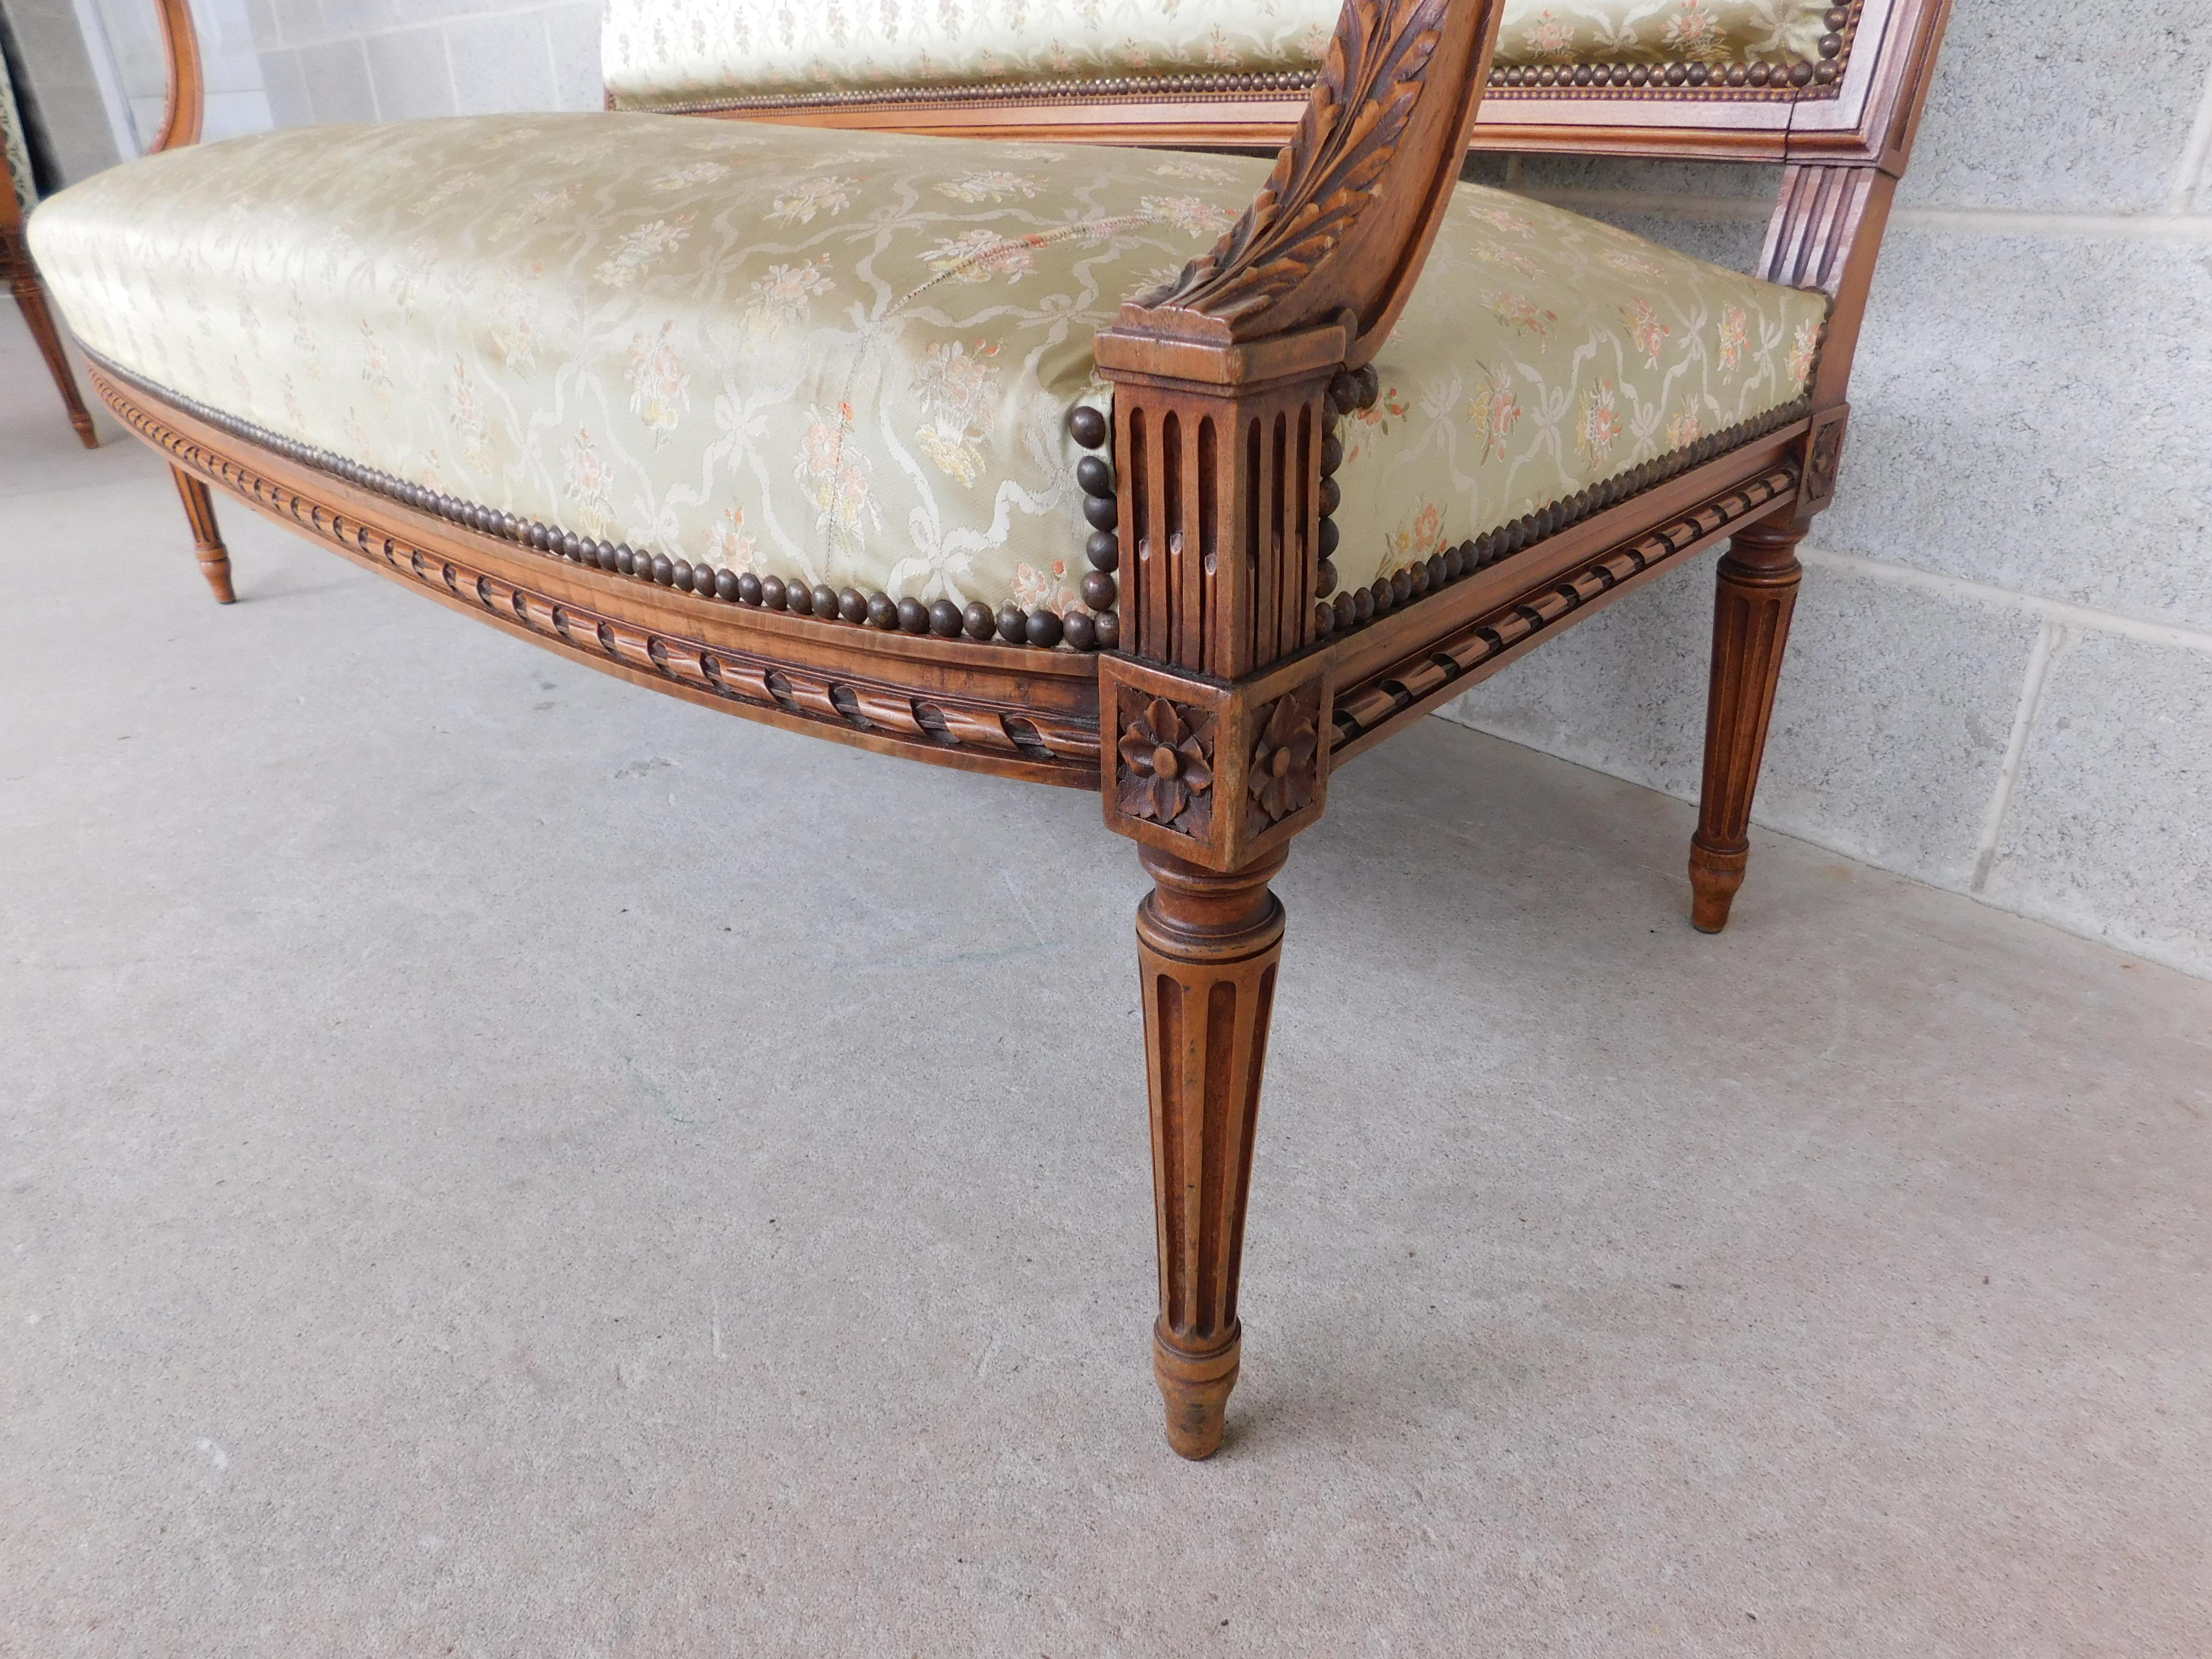 French Settee & Pair of Louis XVI style armchairs from the Late 19th century. These antique oak framed chairs & settee, with upholstered centers set within a highly carved vertical acanthus leaf Top Rail, and Side Post of the frame. The padded arms